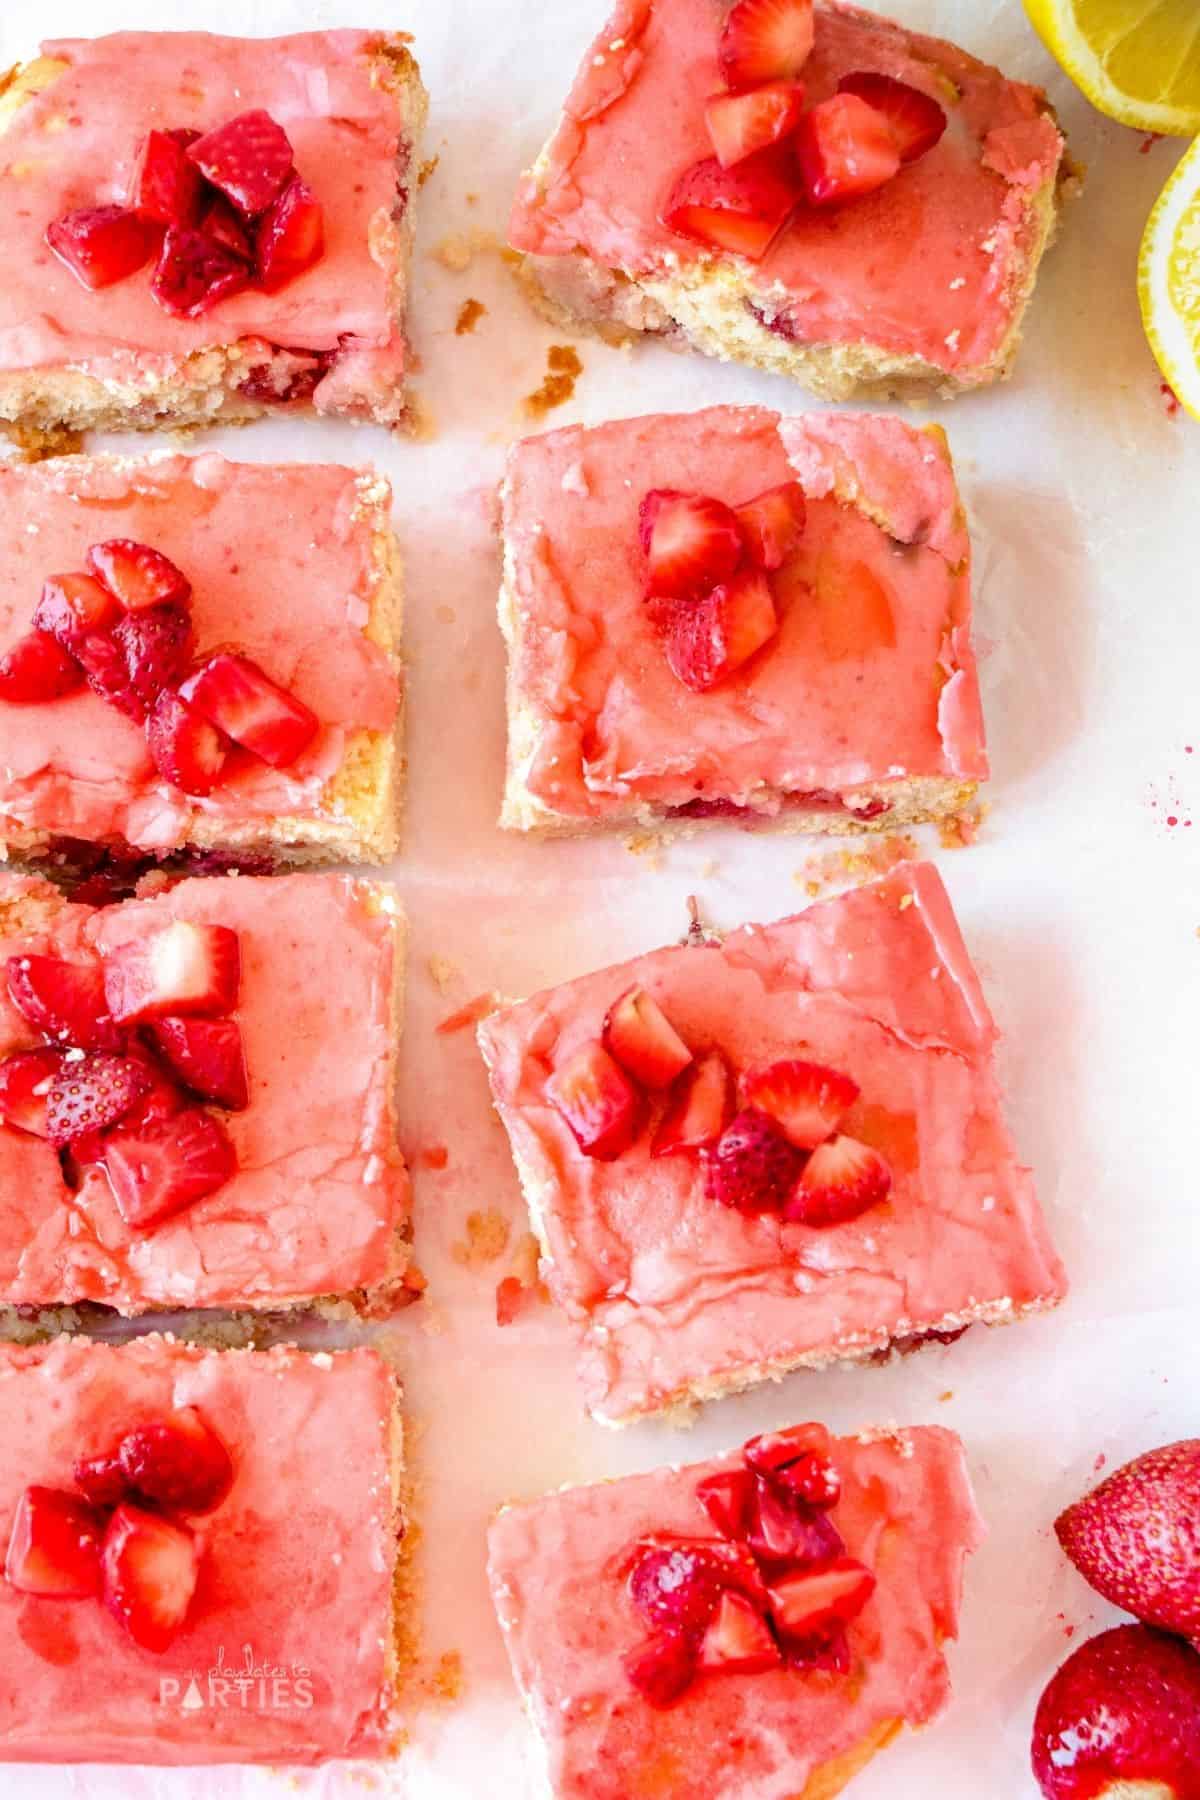 Overhead view of lemon bars covered with strawberry glaze on a white surface.